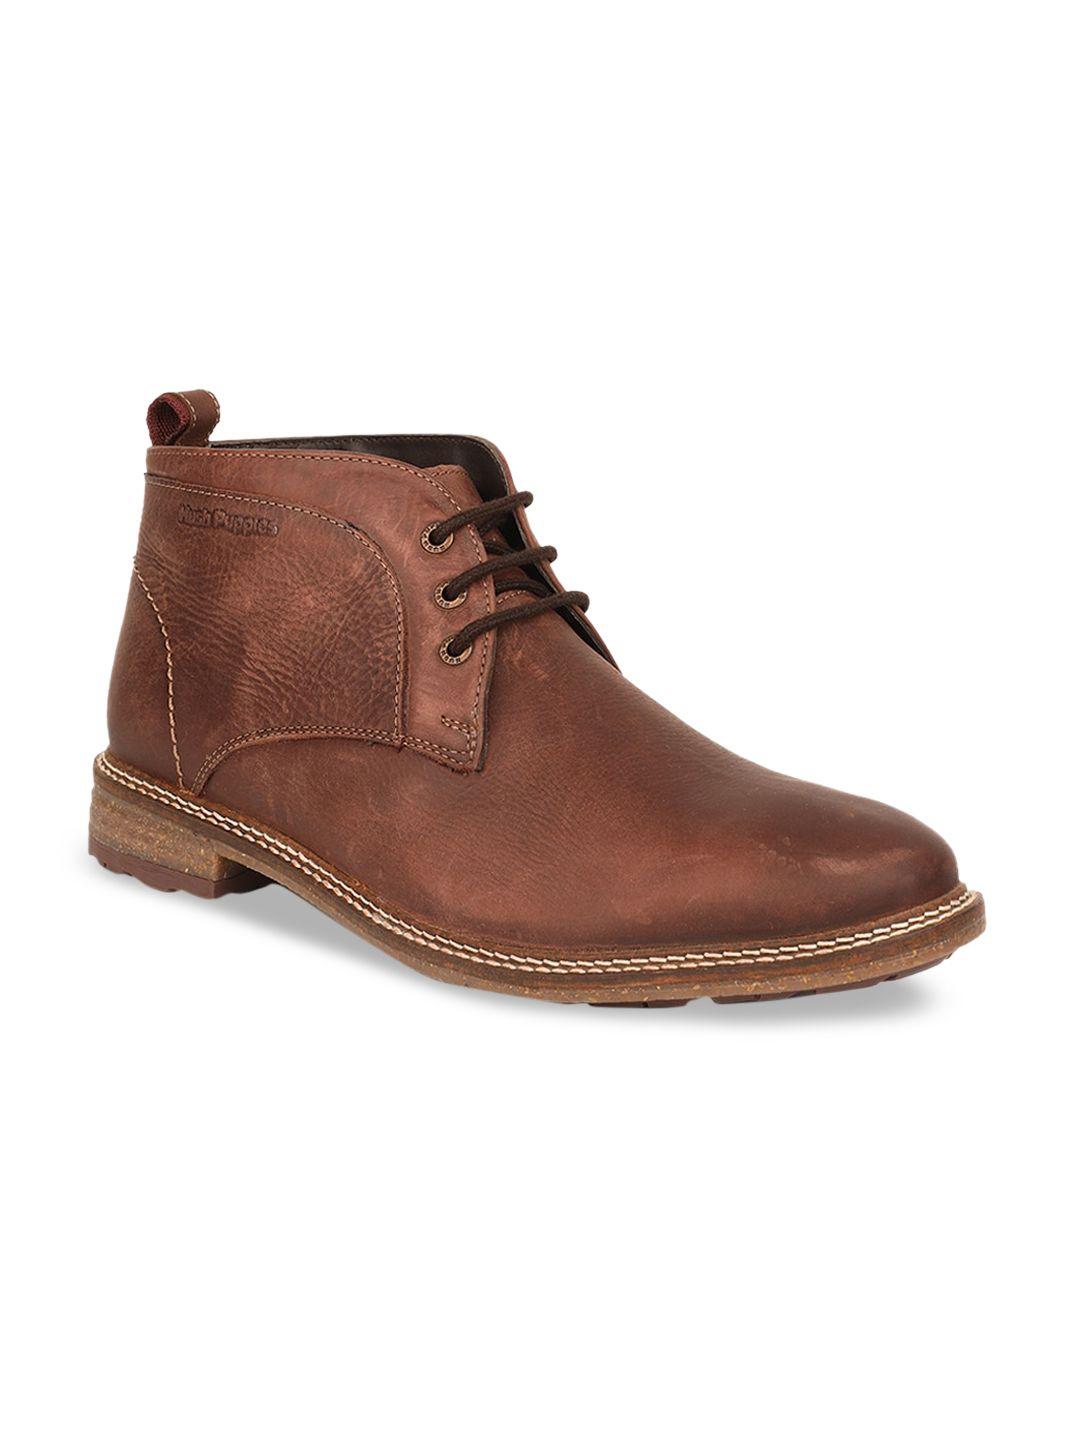 hush puppies men brown solid leather mid-top flat boots